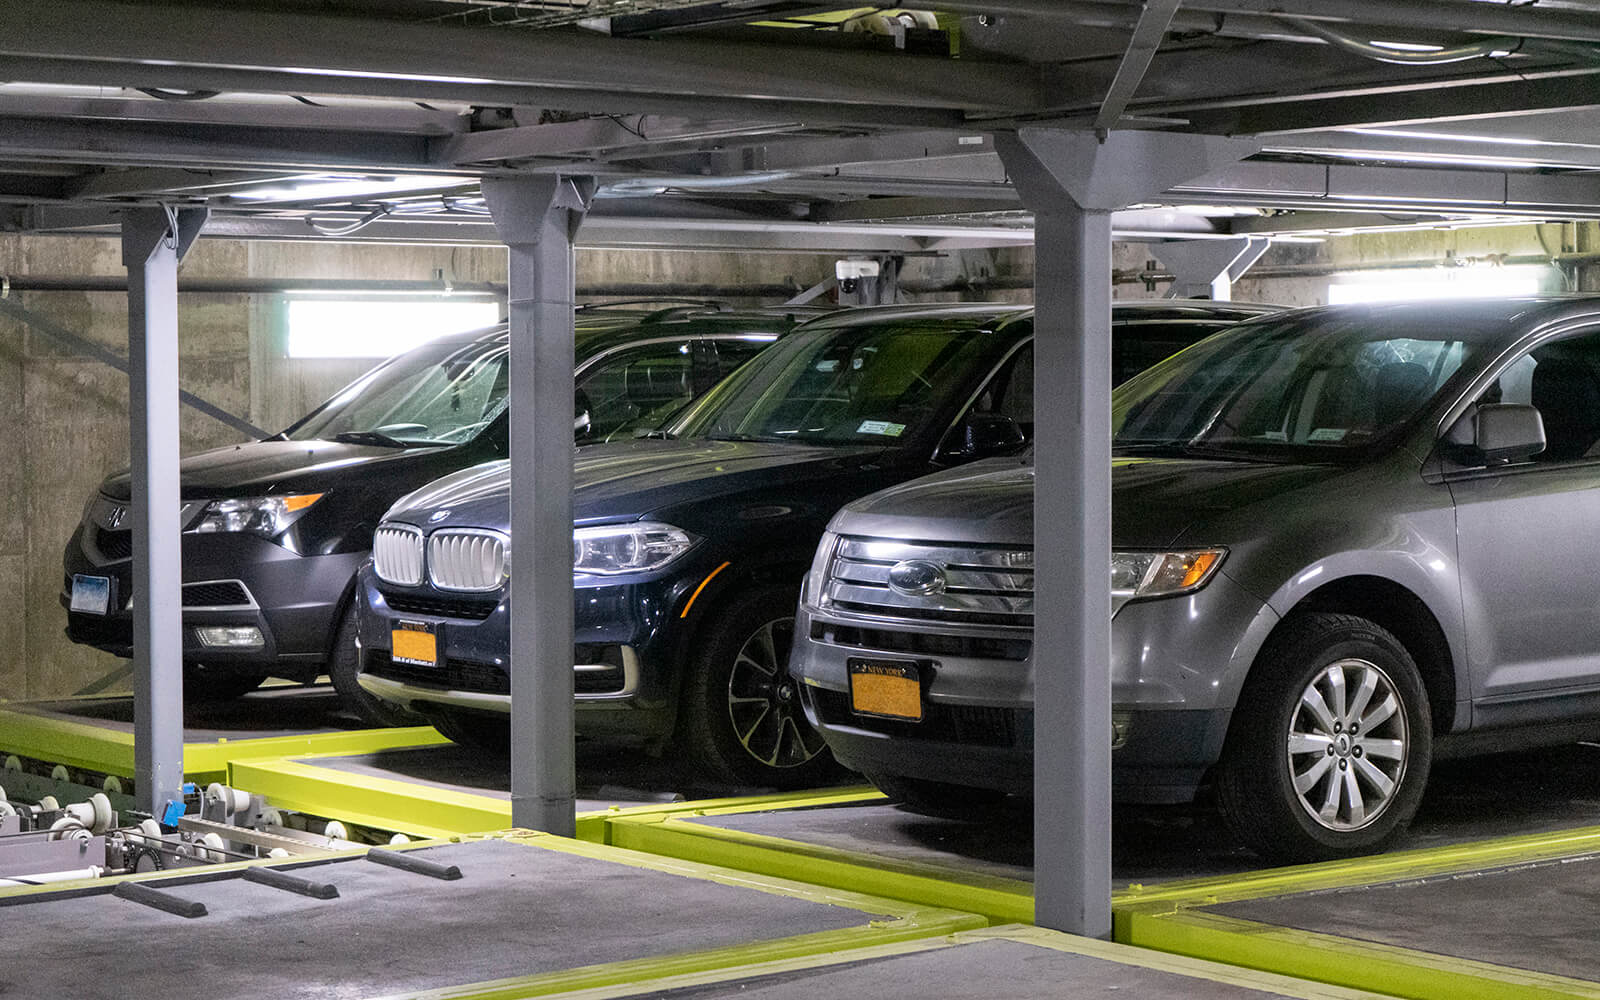 Every automatic parking garage is different